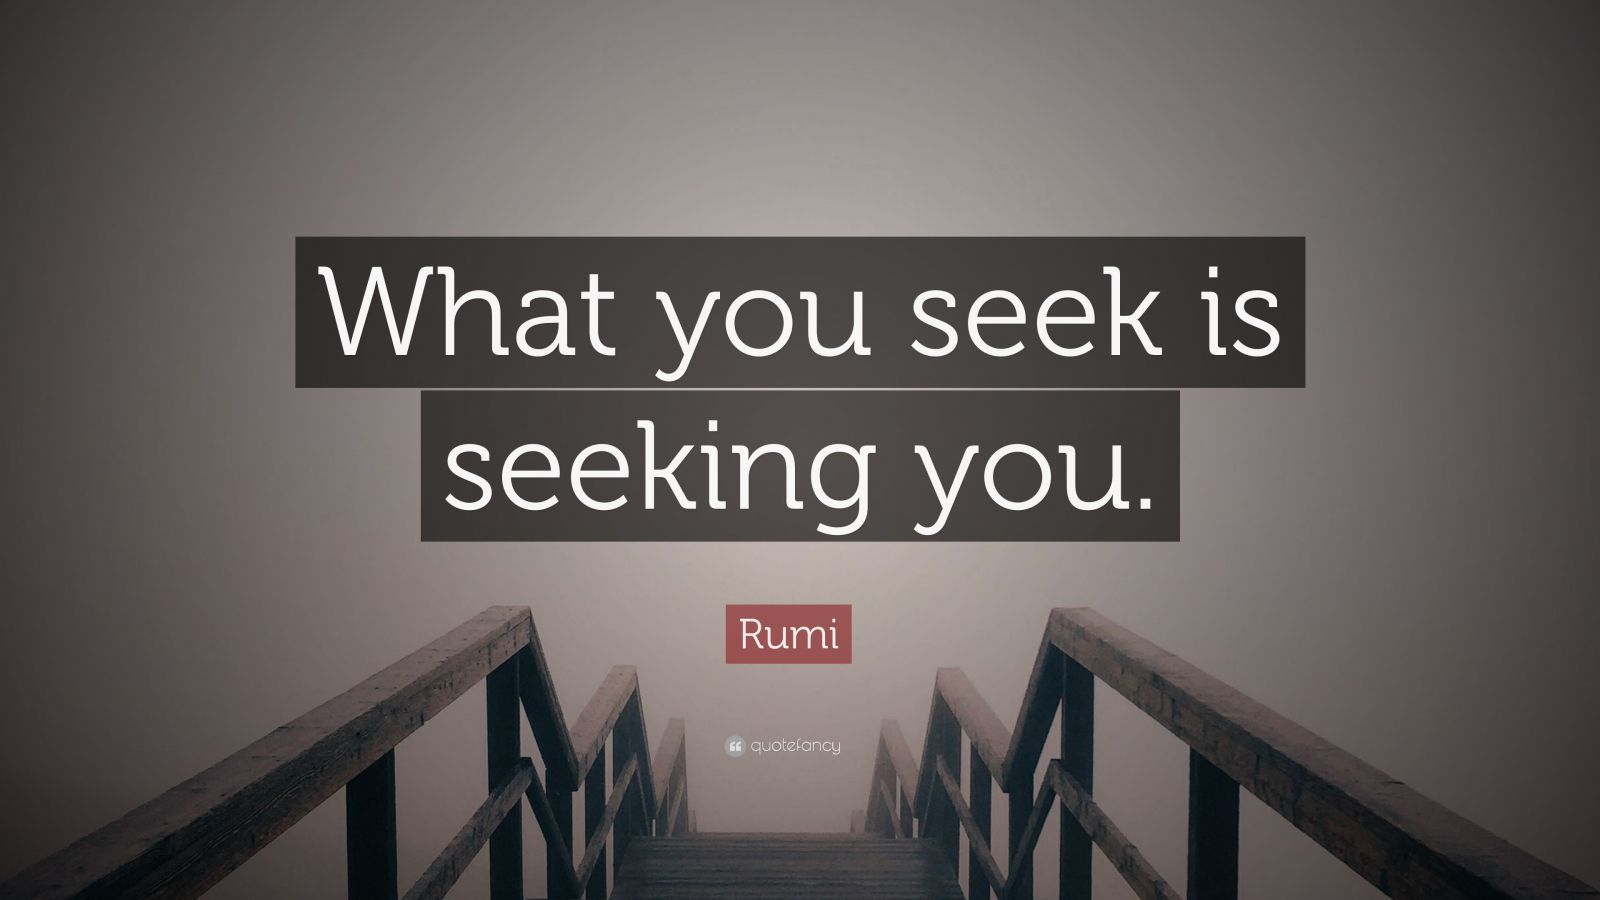 Rumi Quote: “What you seek is seeking you.” (23 wallpapers) - Quotefancy